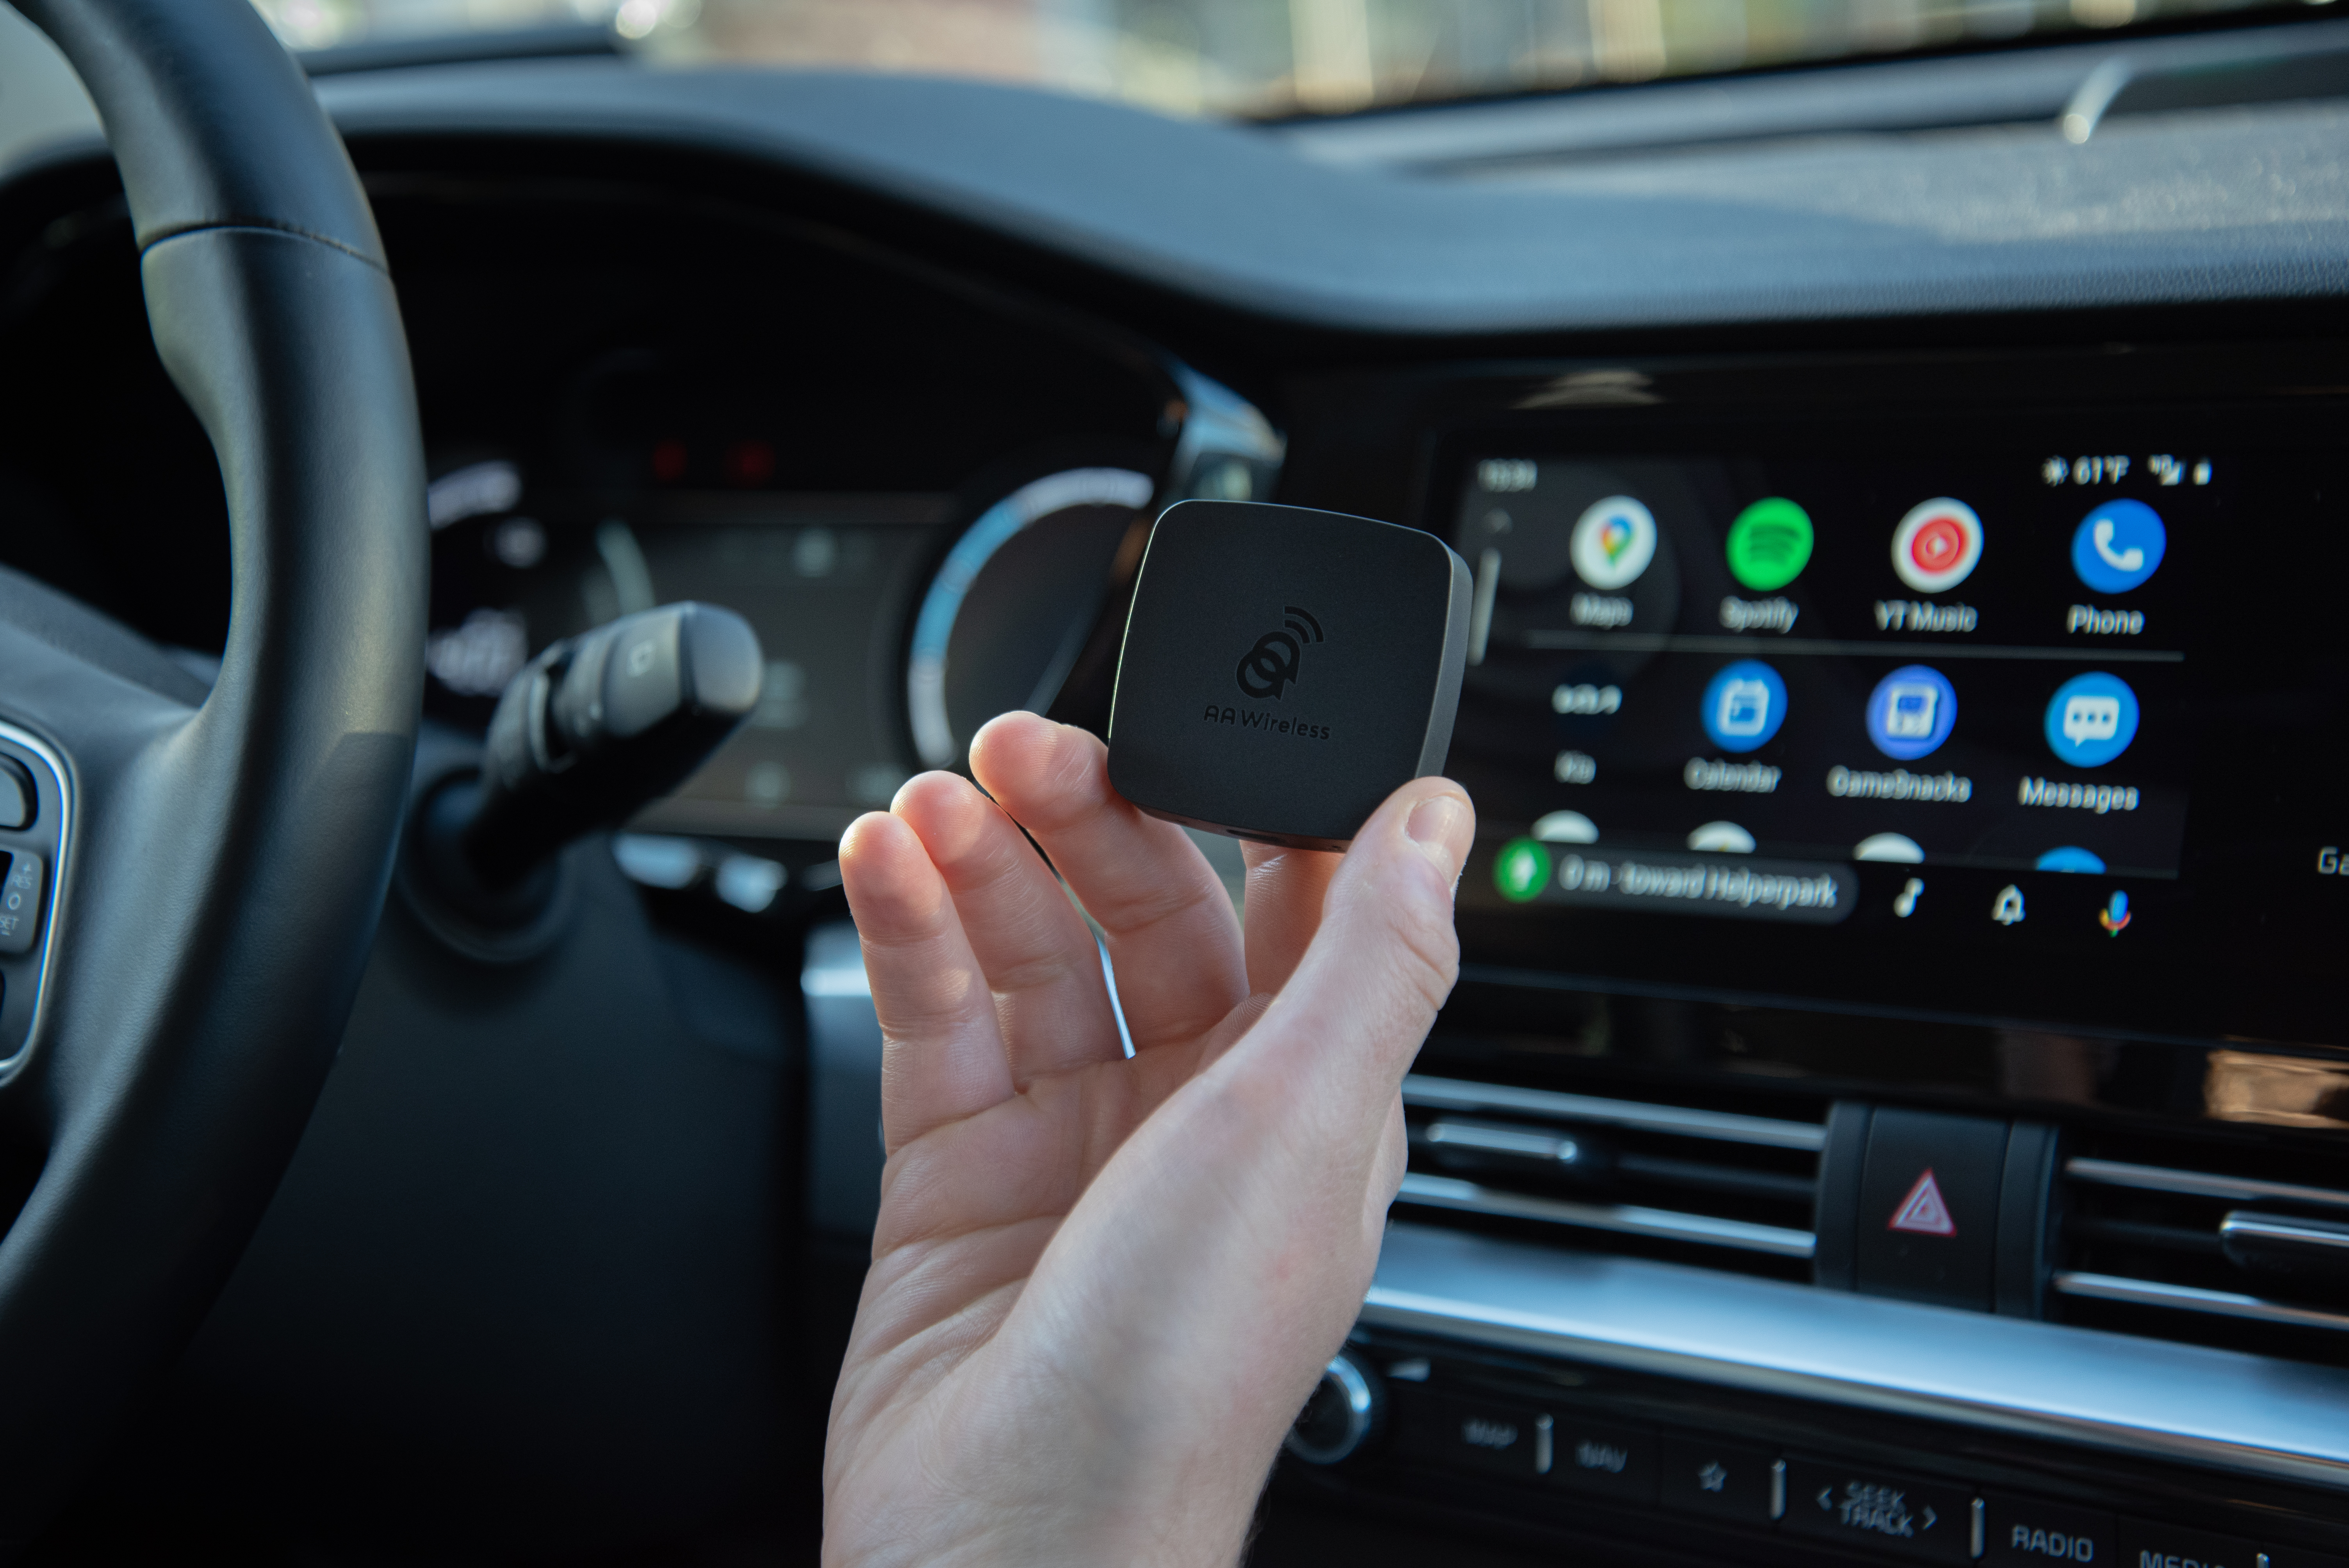 AAWireless' Android Auto dongle starts shipping - 9to5Google